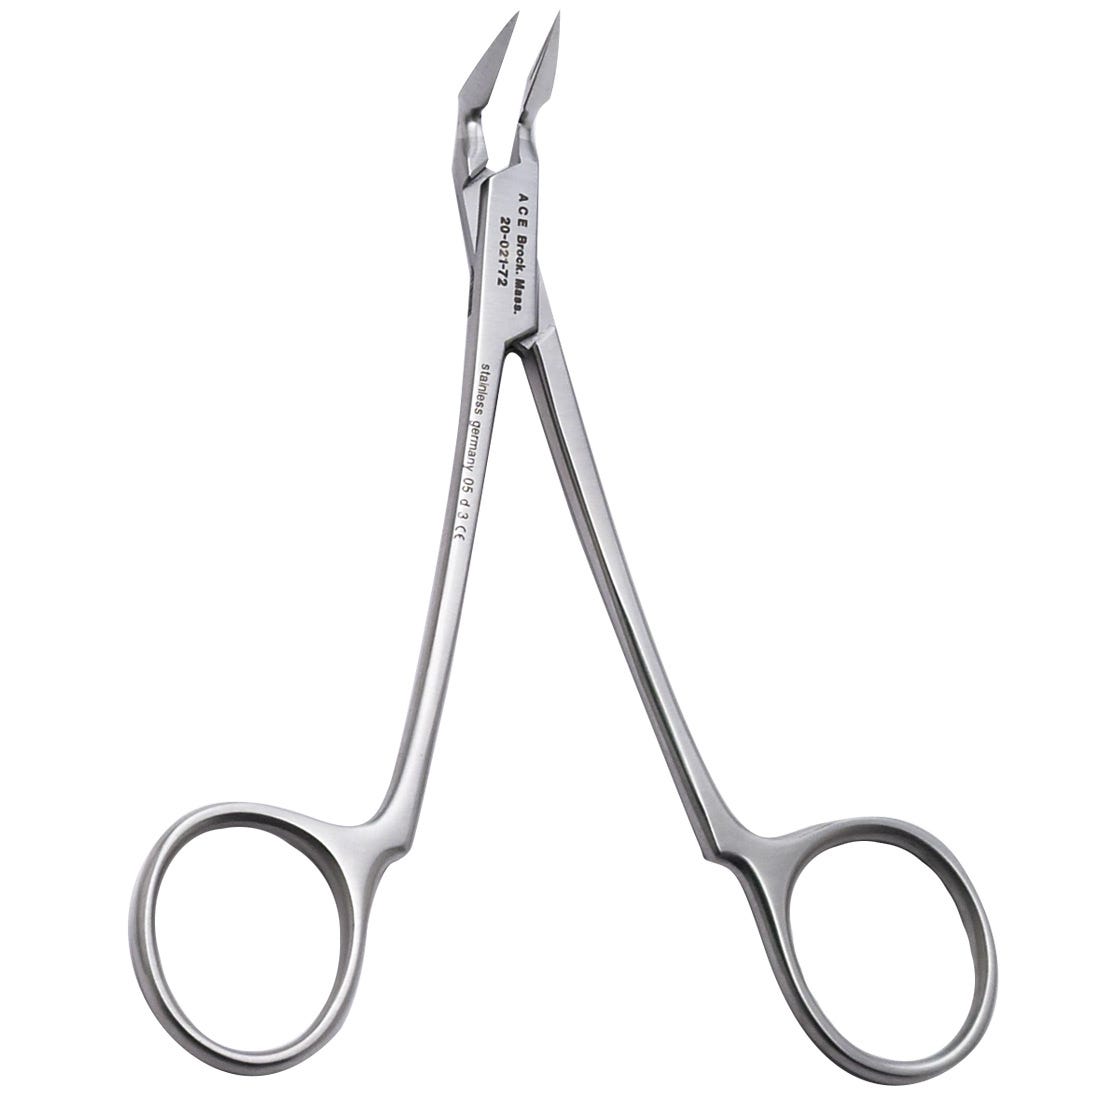 ACE Steiglitz Root Forceps, 90 degree Angle